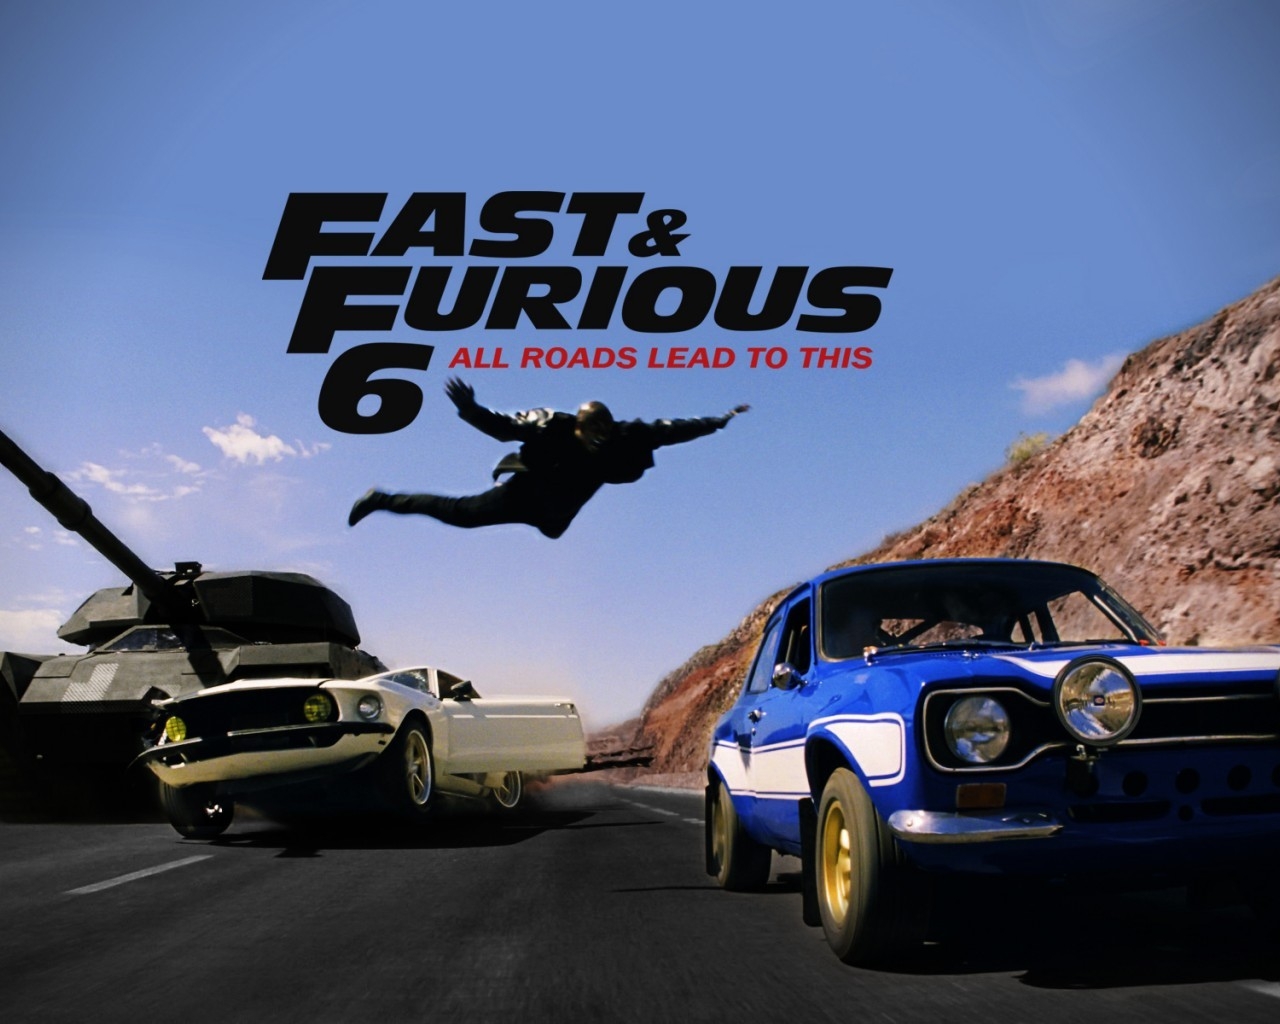 The Fast and Furious 6 for 1280 x 1024 resolution